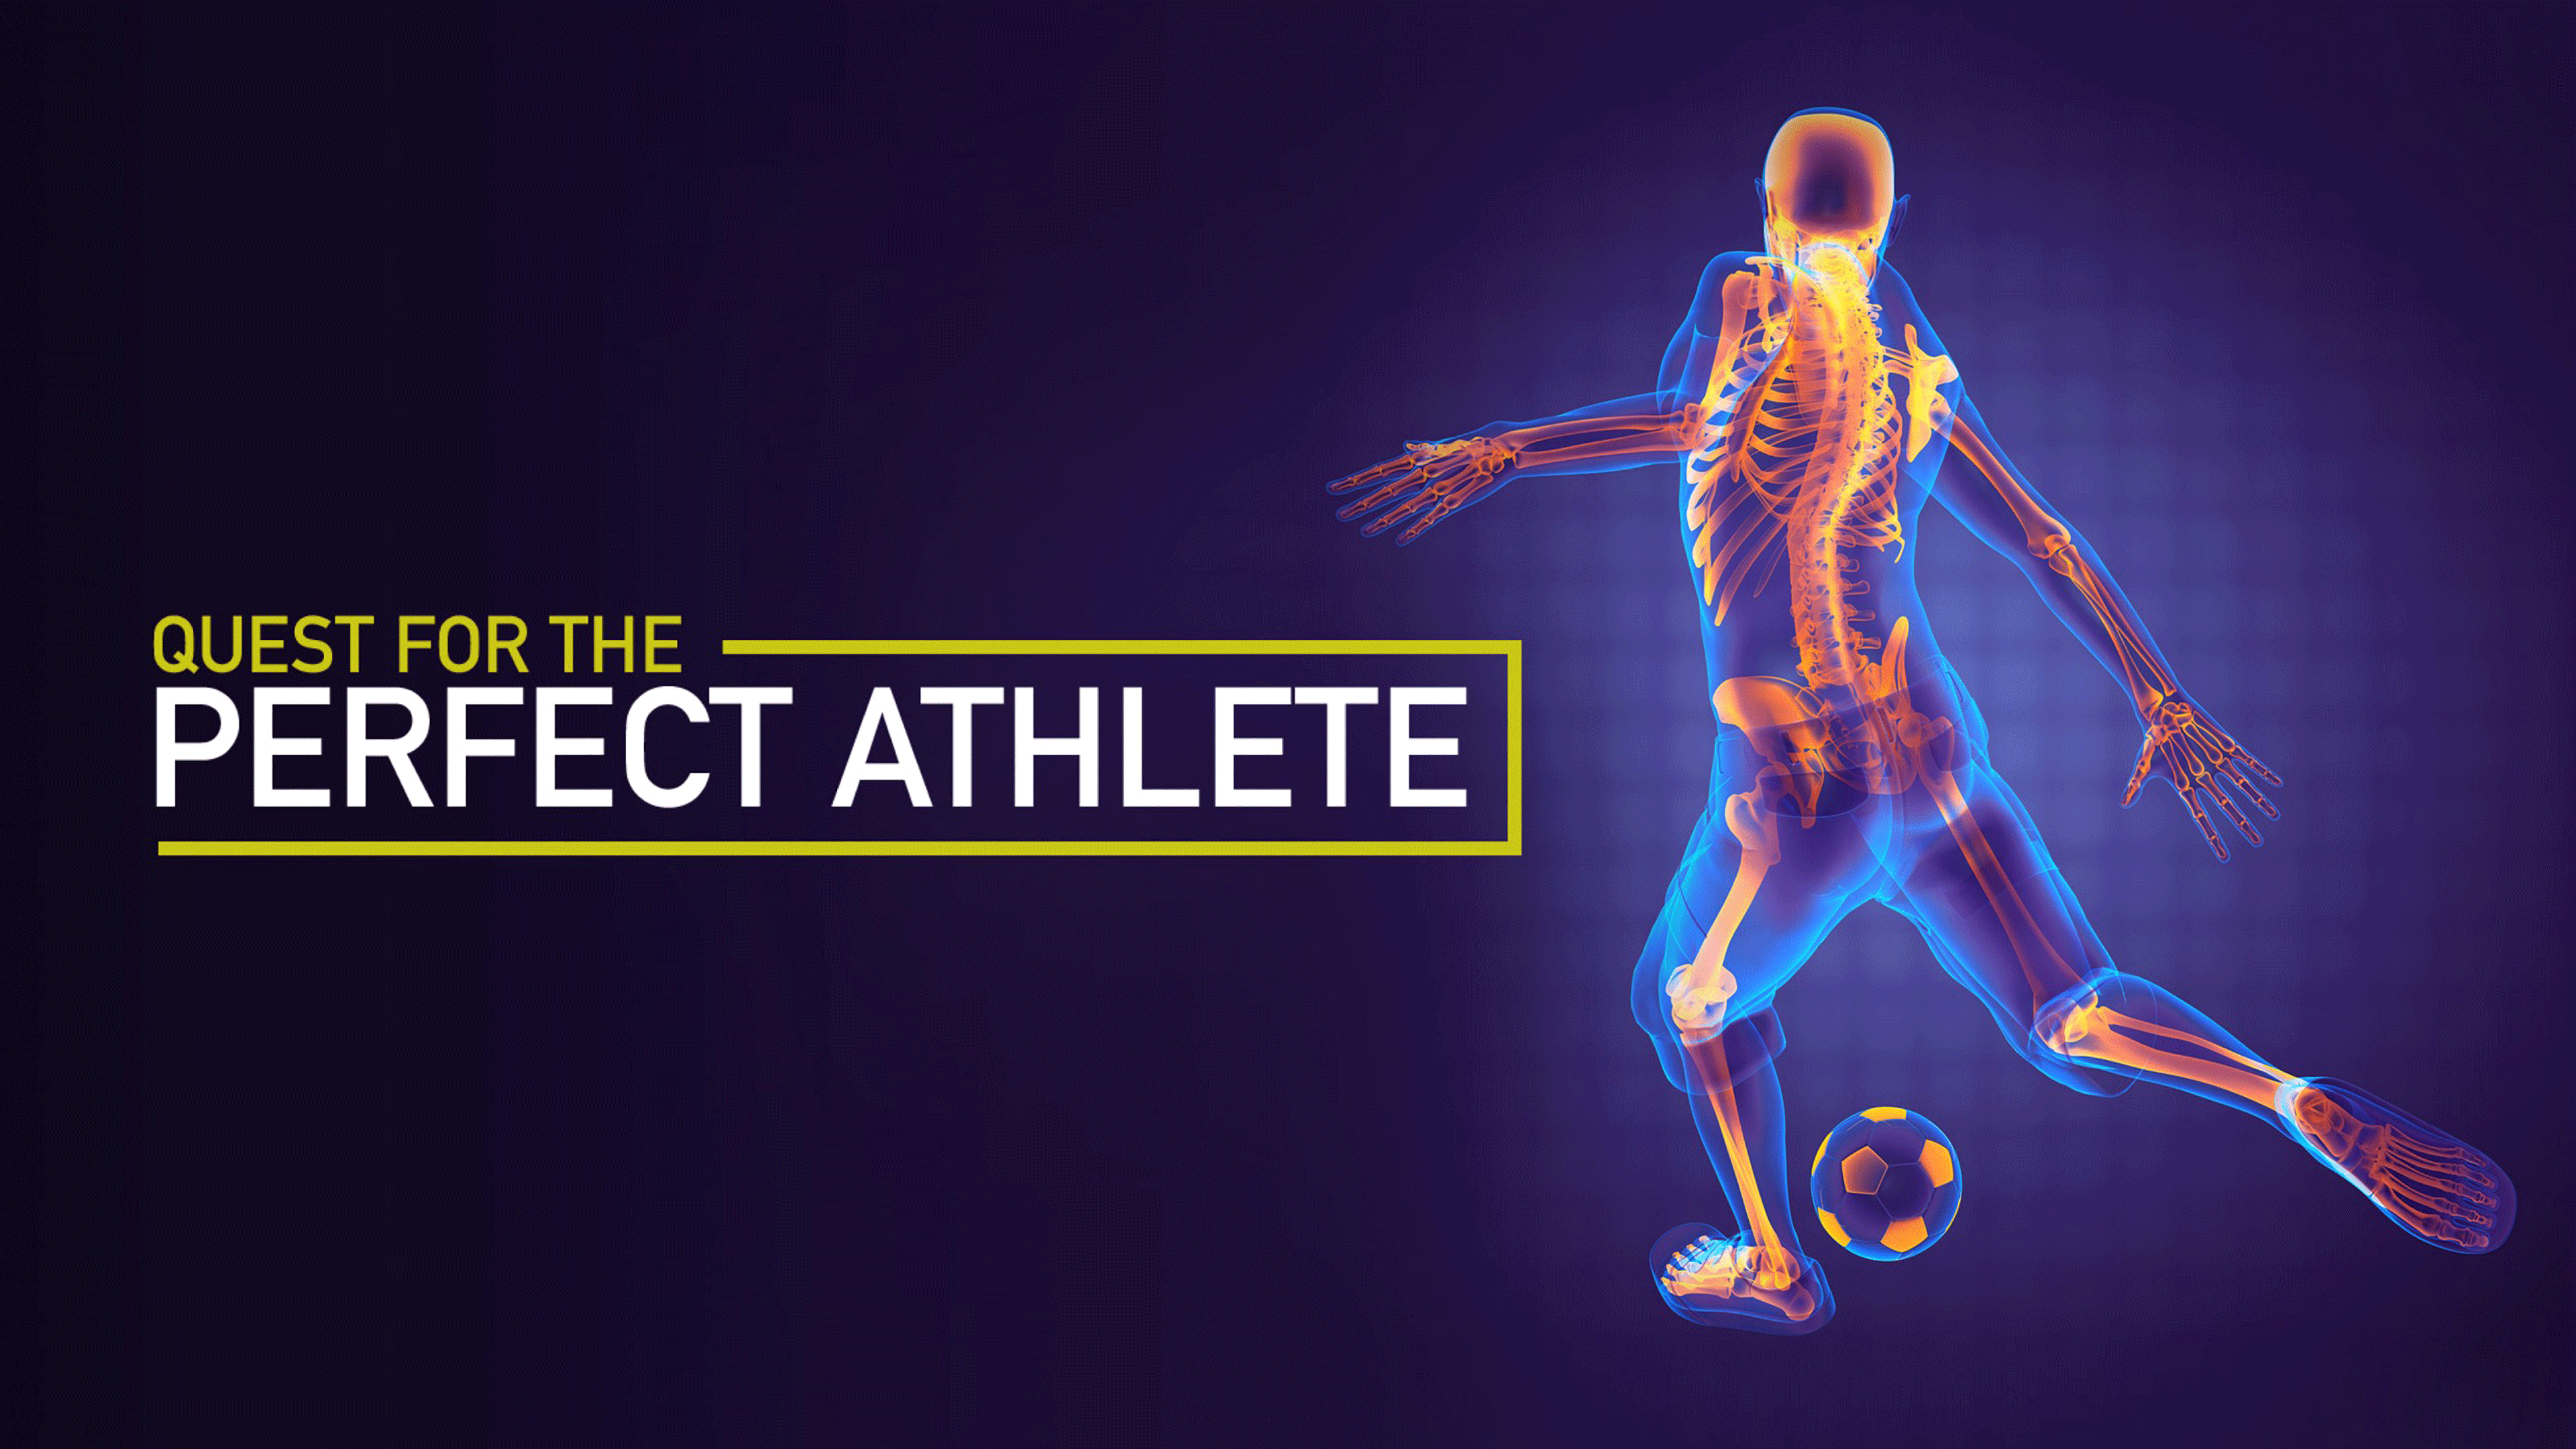 Quest for the Perfect Athlete